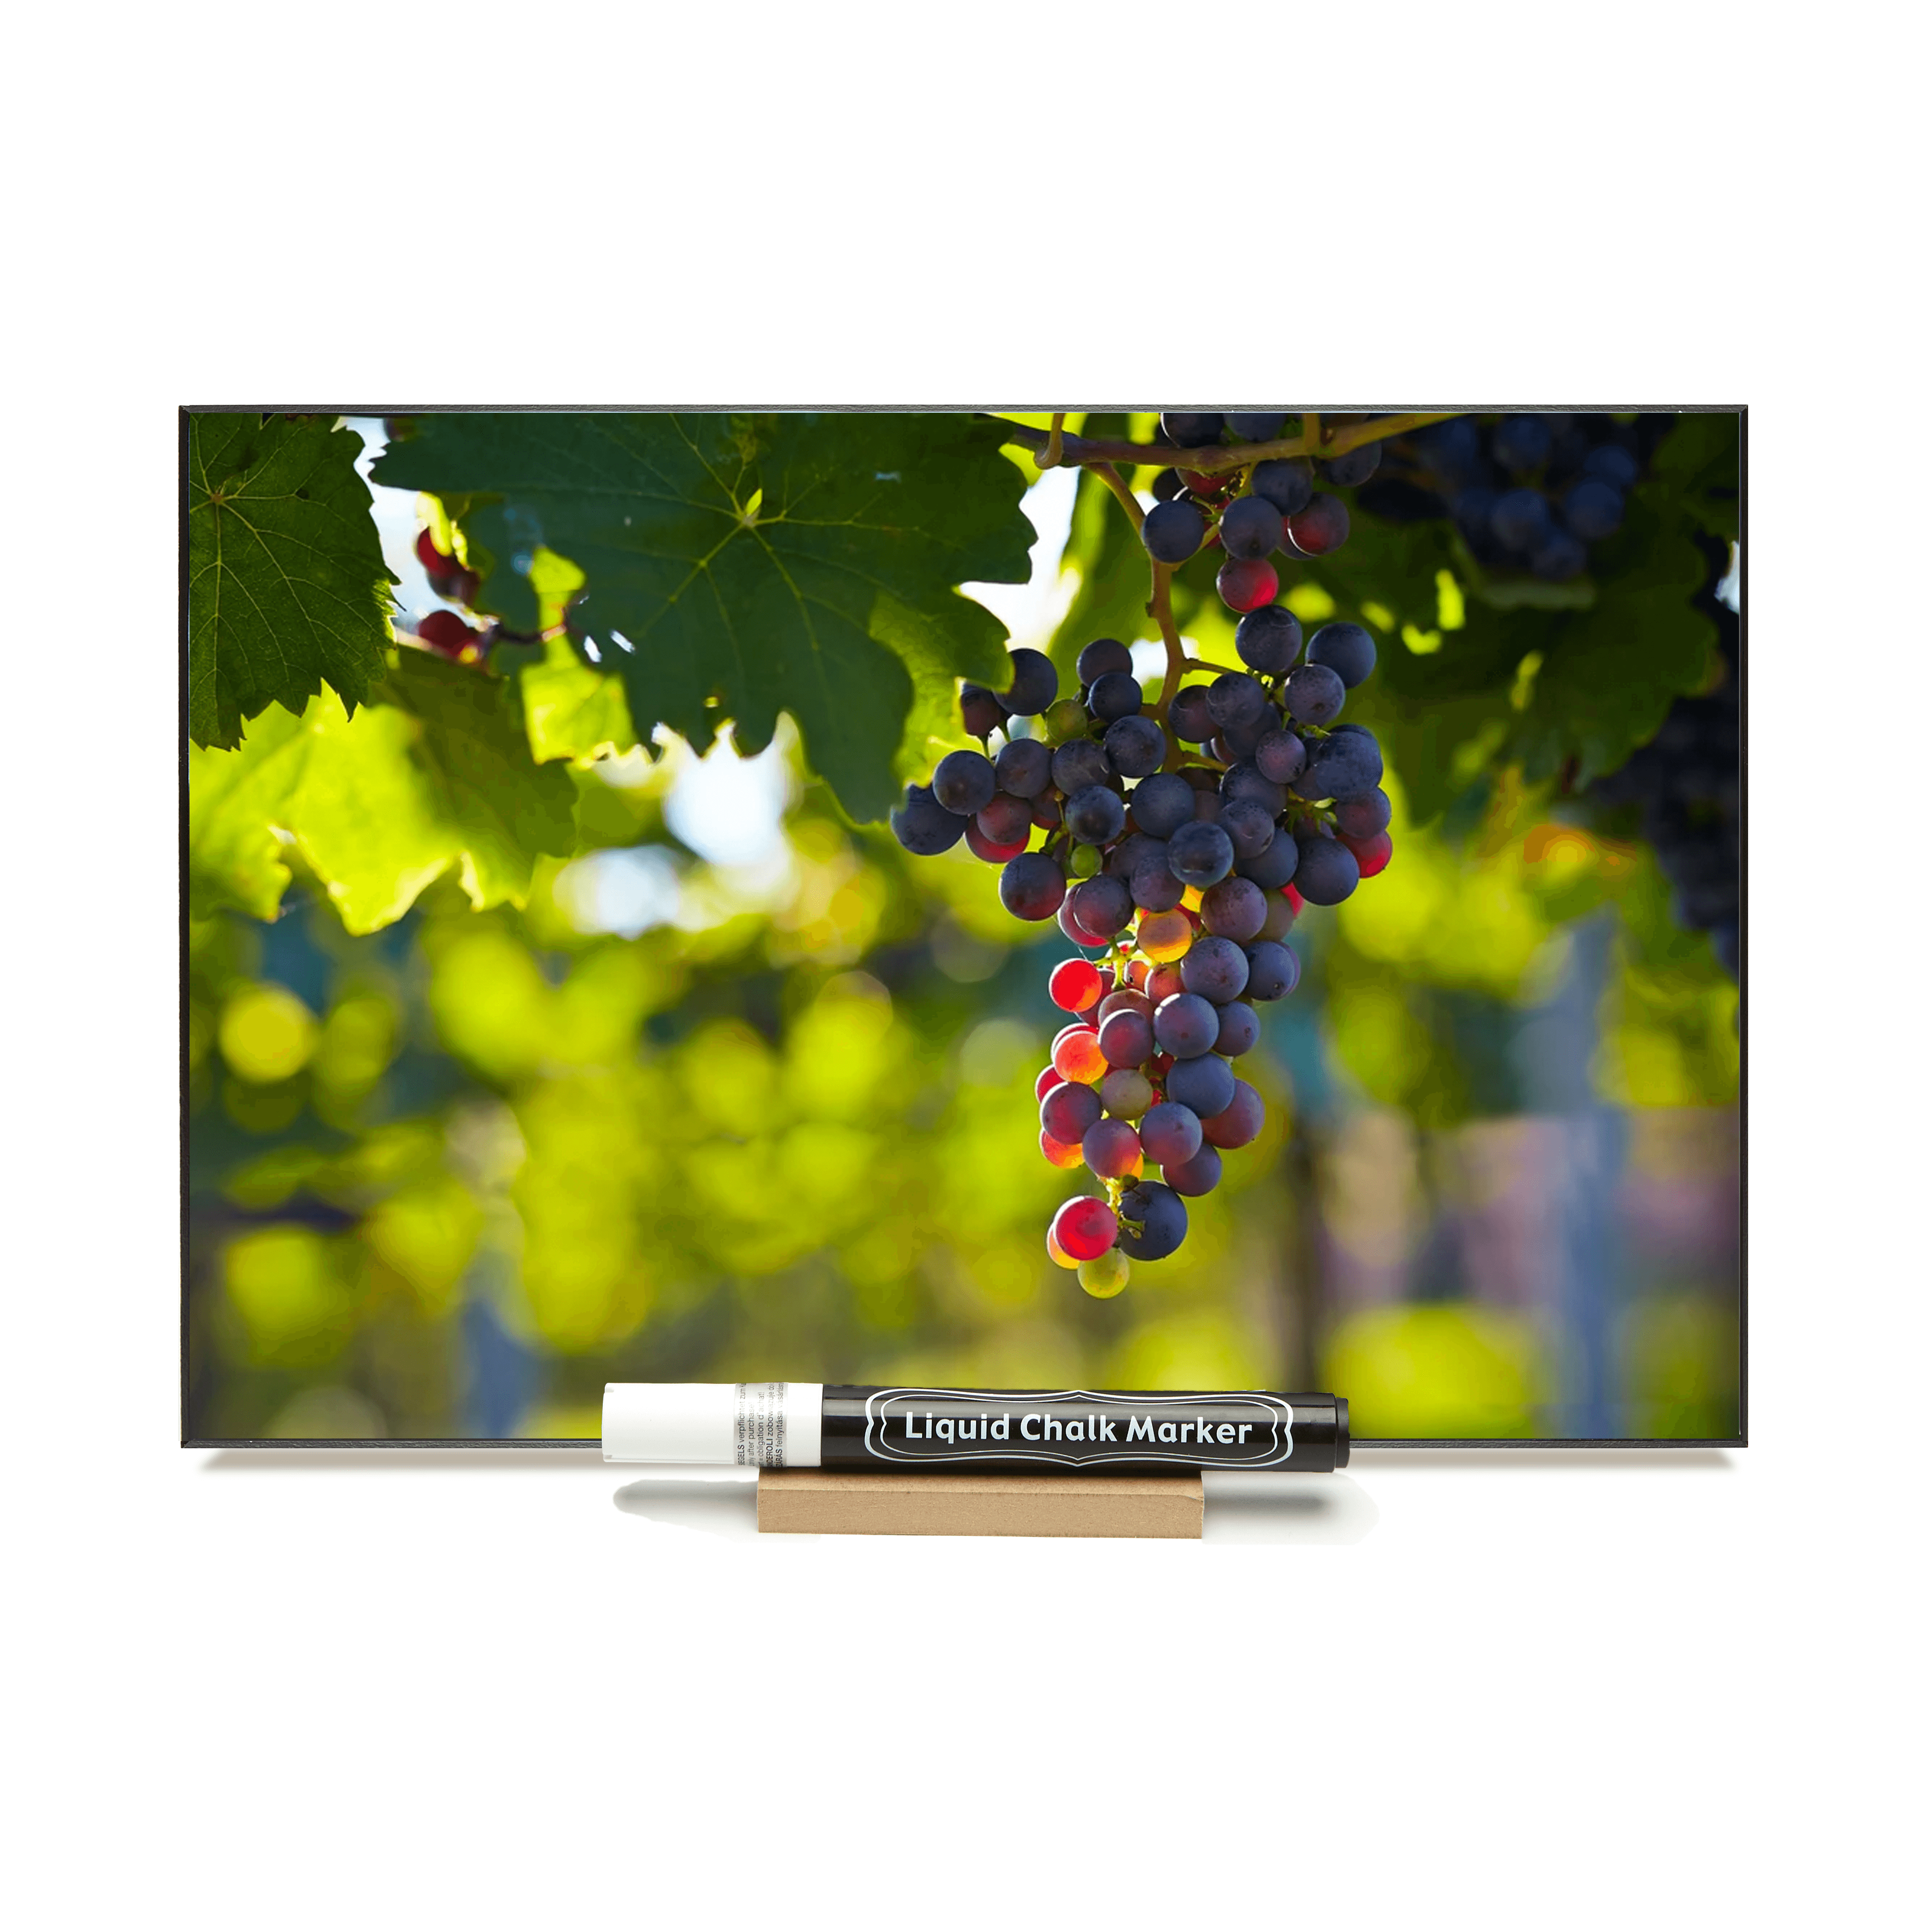 Bunch of Grapes - PHOTO CHALKBOARD  Includes Chalkboard, Chalk Marker & Stand